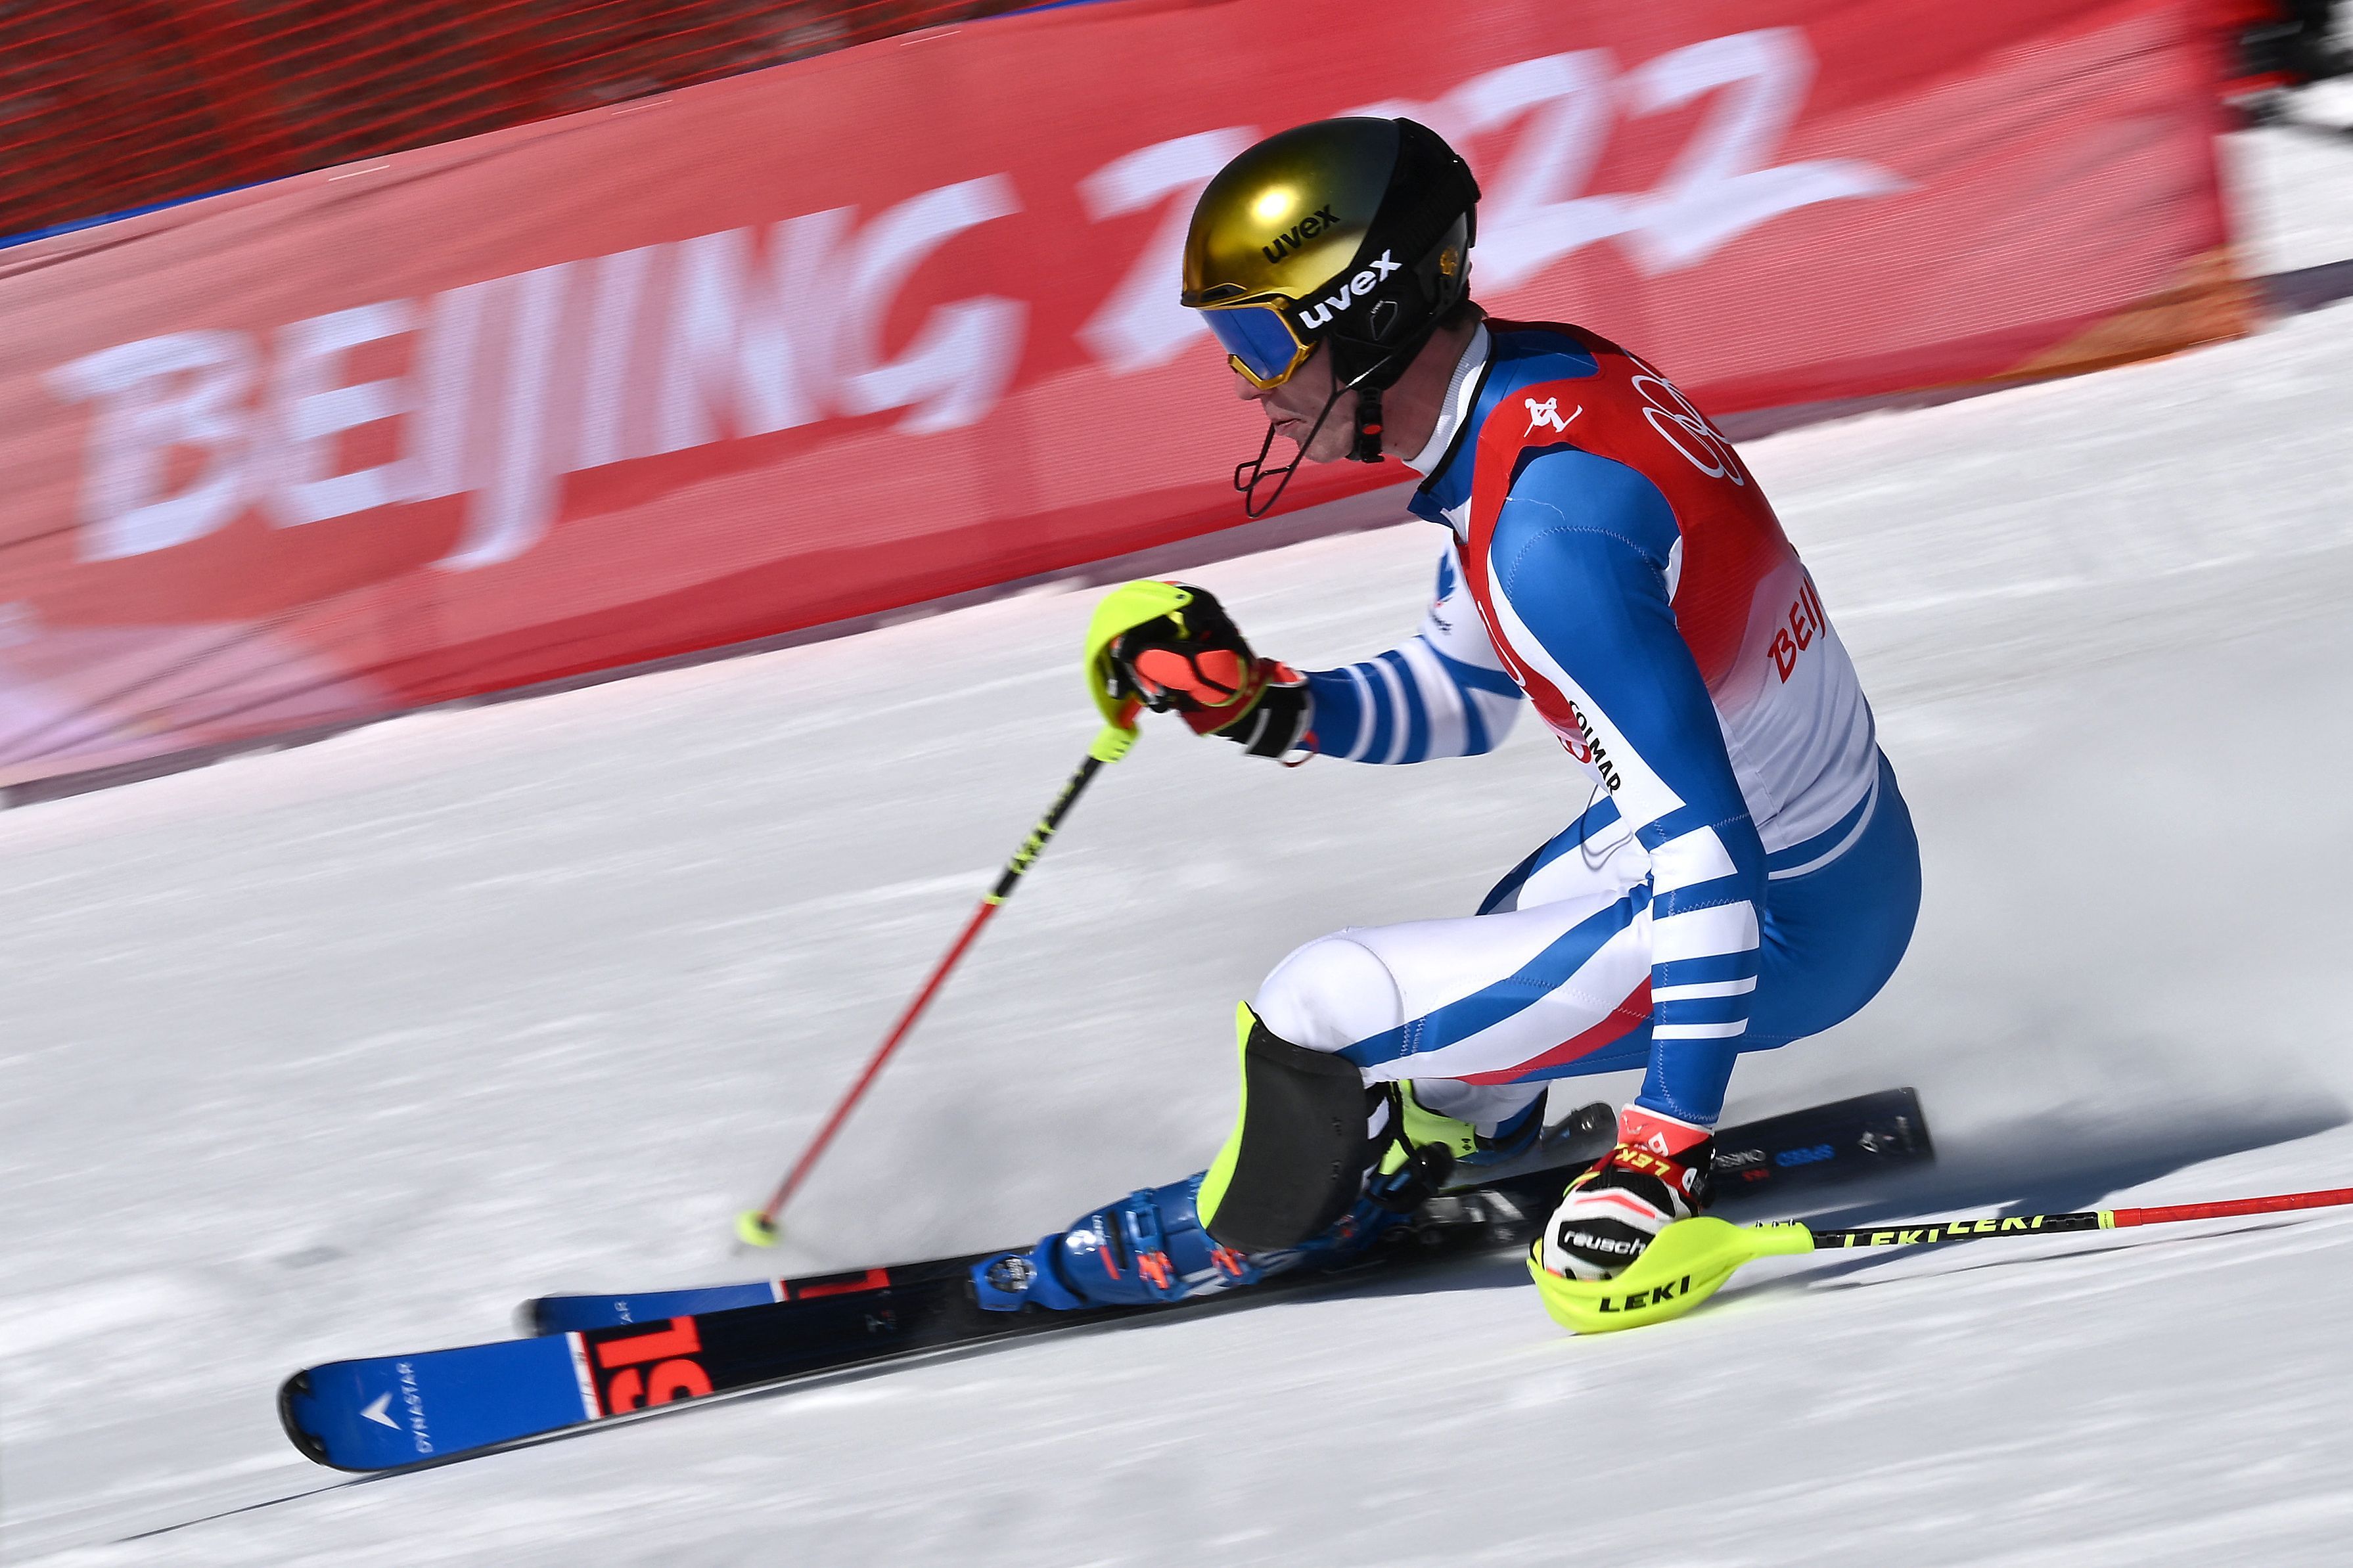 France's Clement Noel competes in the second run of the men's slalom during the Beijing 2022 Winter Olympic Games at the Yanqing National Alpine Skiing Centre in Yanqing on February 16, 2022